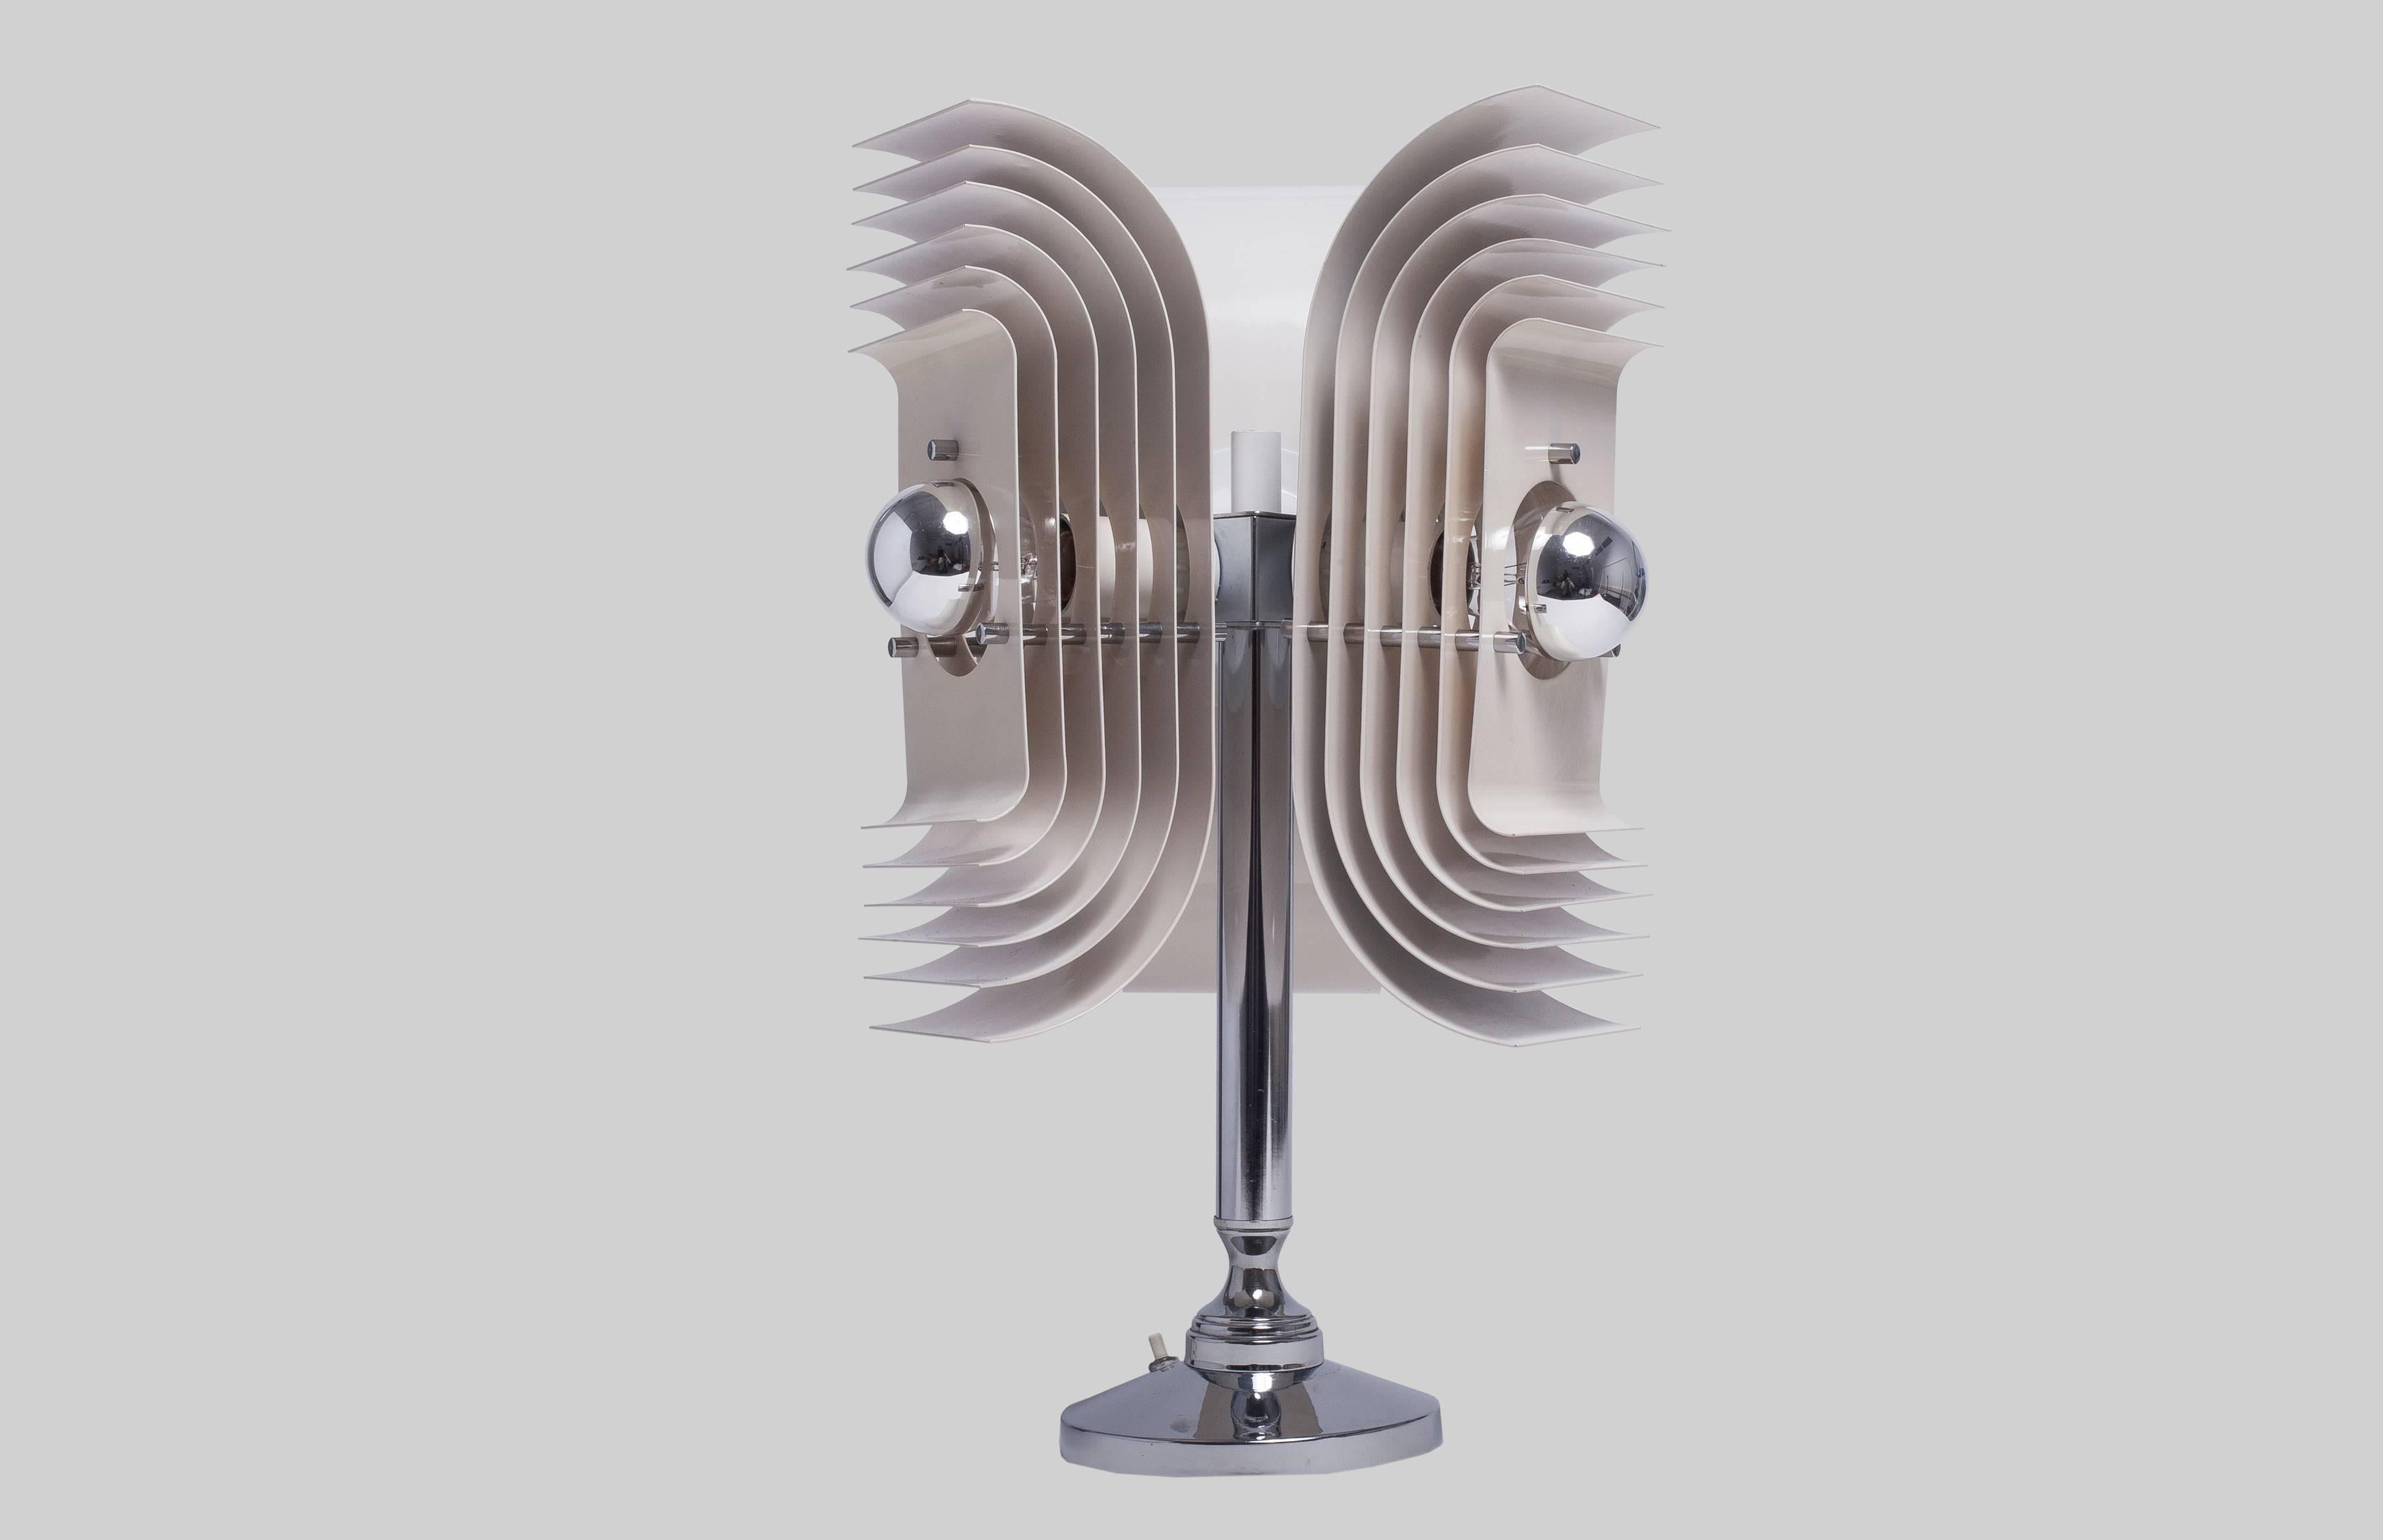 Italian table lamp in Stilnovo style.
Modernist and sculptural lamp to add an interesting twist to an interior.
Made with enameled metal and chrome-plated base.

  